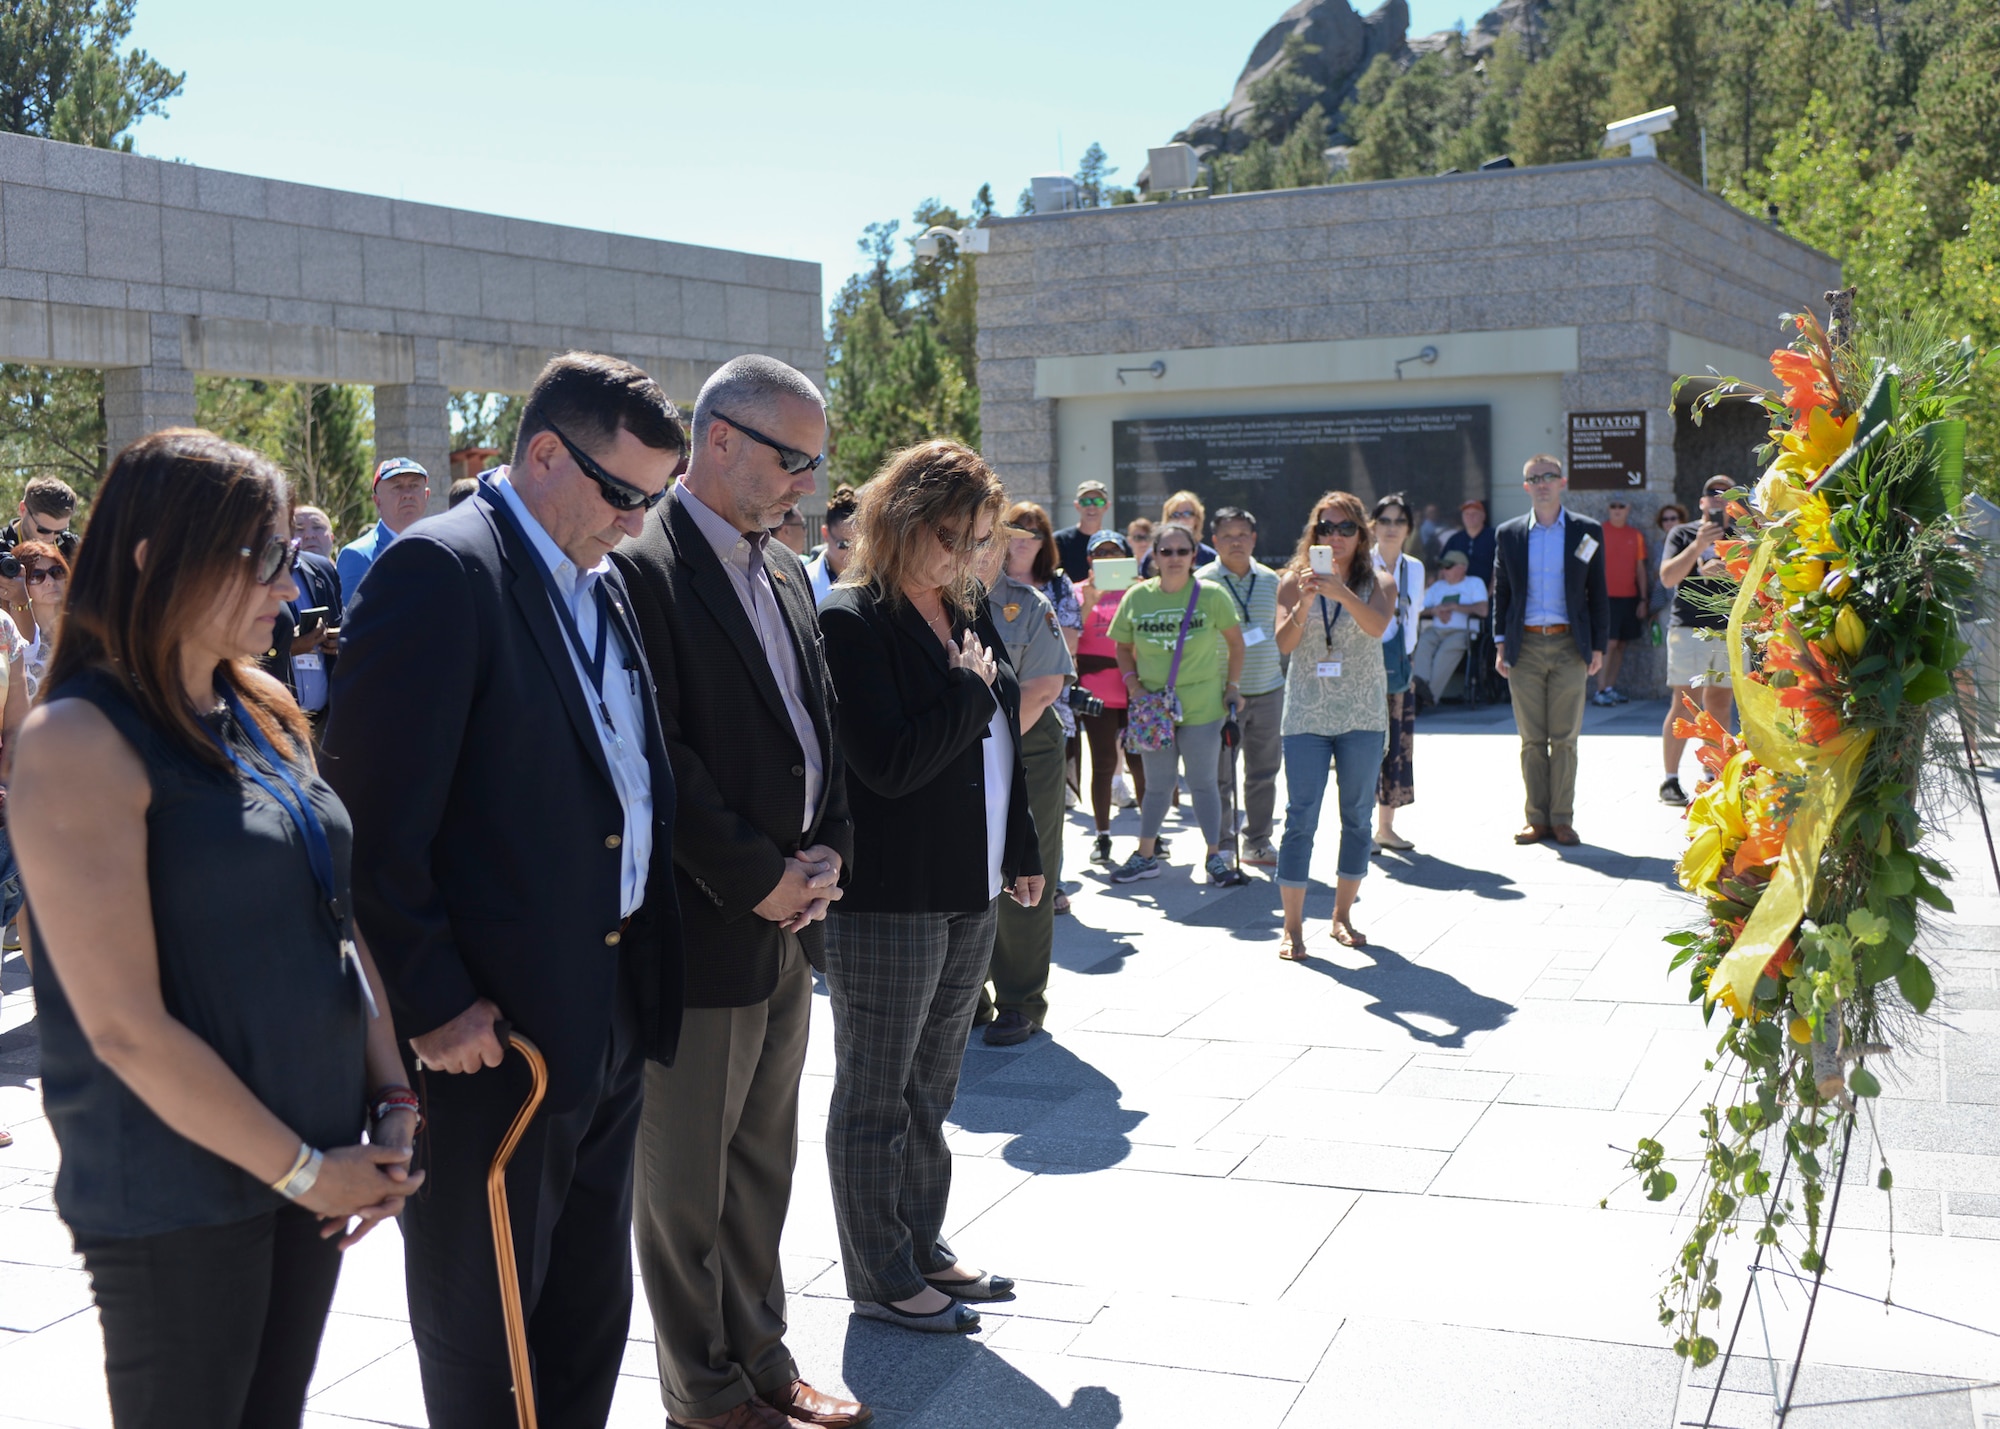 Senior foreign and U.S. attachés stand in silence during a wreath laying ceremony at the Mount Rushmore National Memorial, S.D., Sept. 11, 2016. The ceremony, administered in silence, was conducted in honor of the 15th anniversary of the attacks on Sept. 11, 2001, that occurred in New York, Virginia and Pennsylvania. (U.S. Air Force photo by Senior Airman Anania Tekurio)